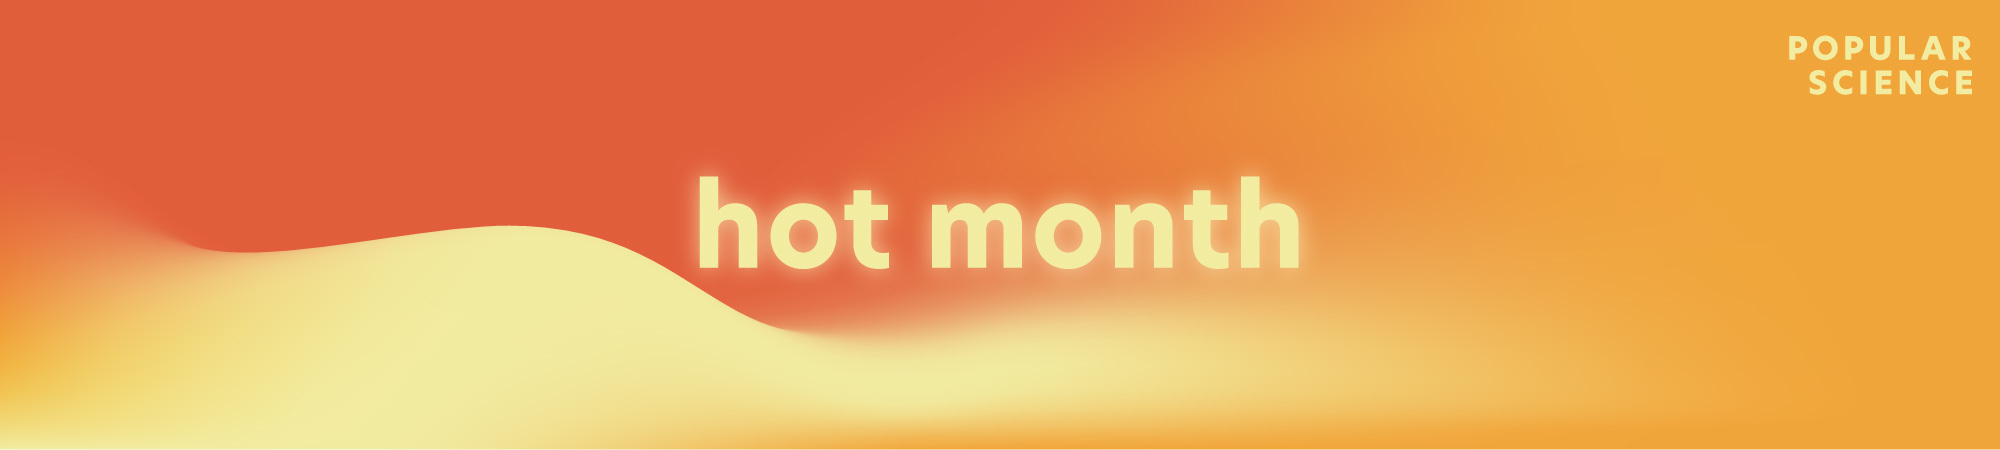 hot month banner popular science